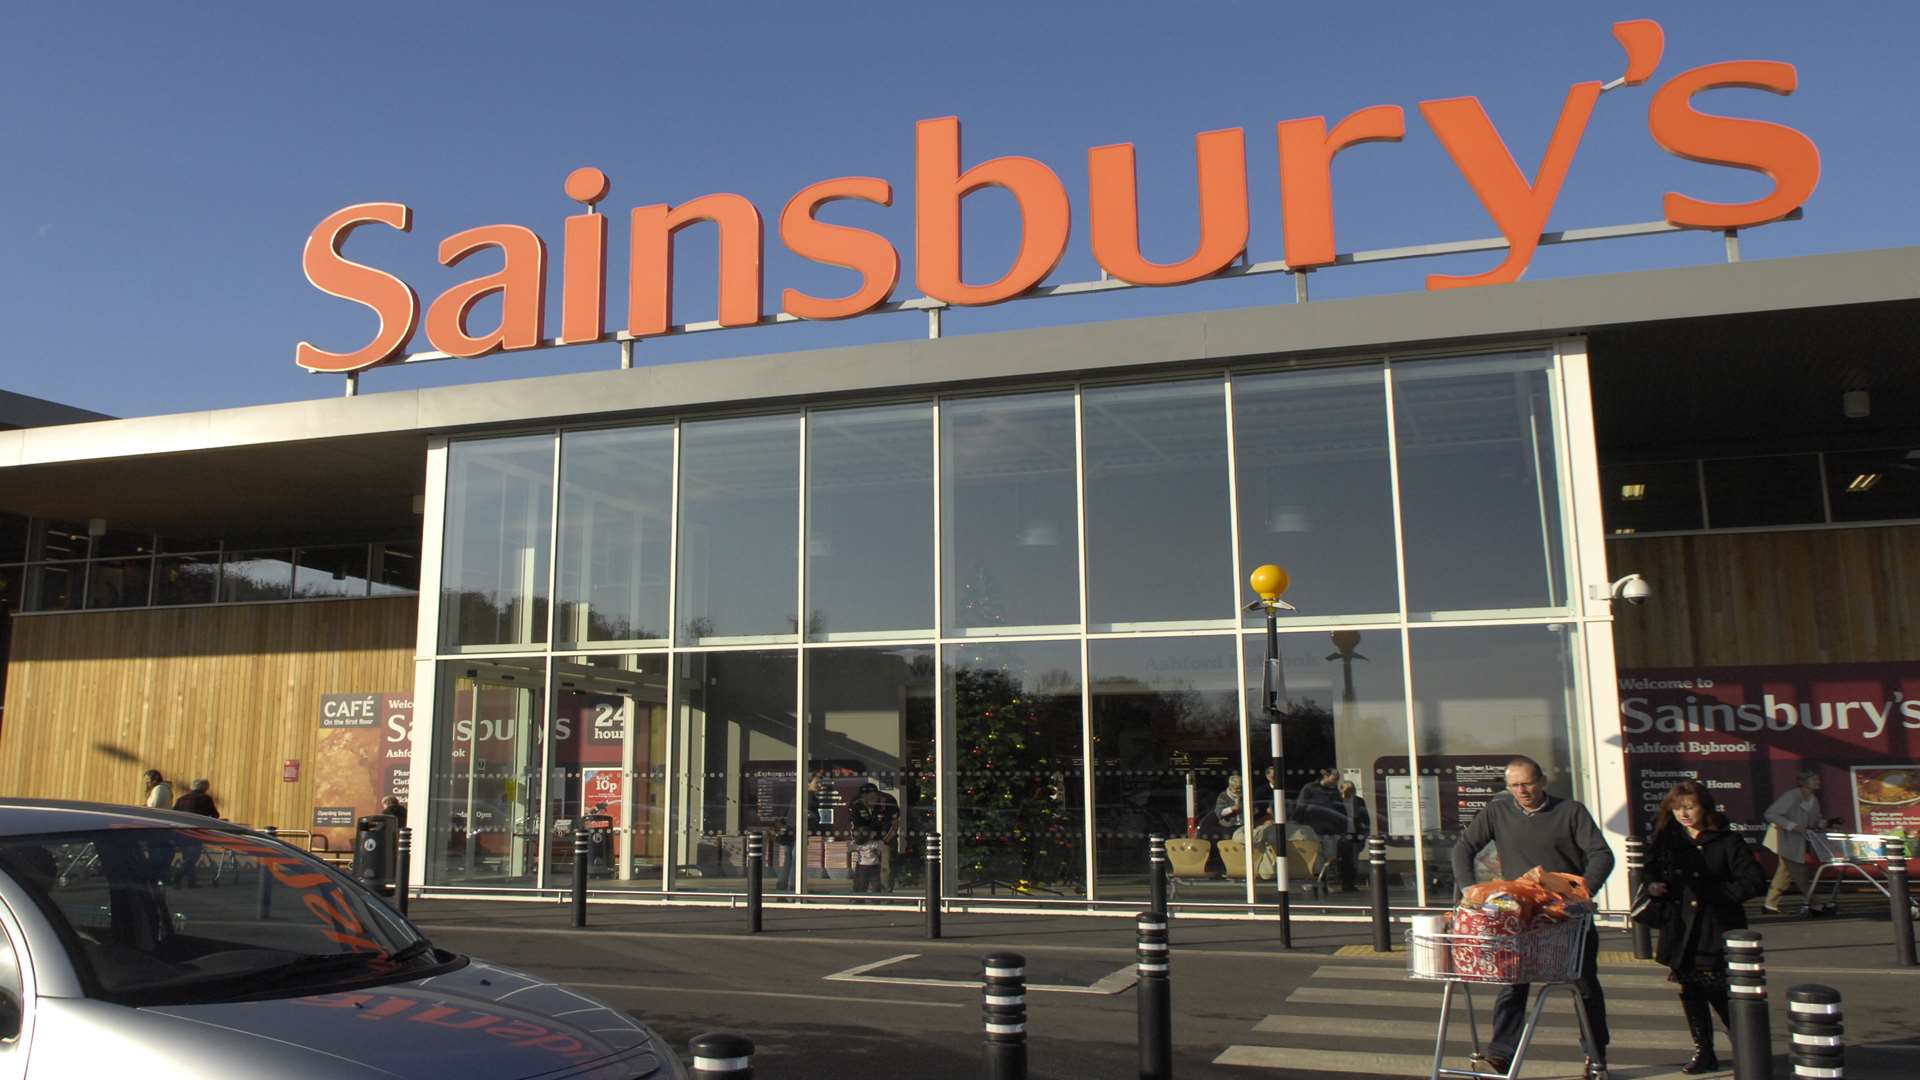 Sainsbury's is pulling out of two projects in Kent